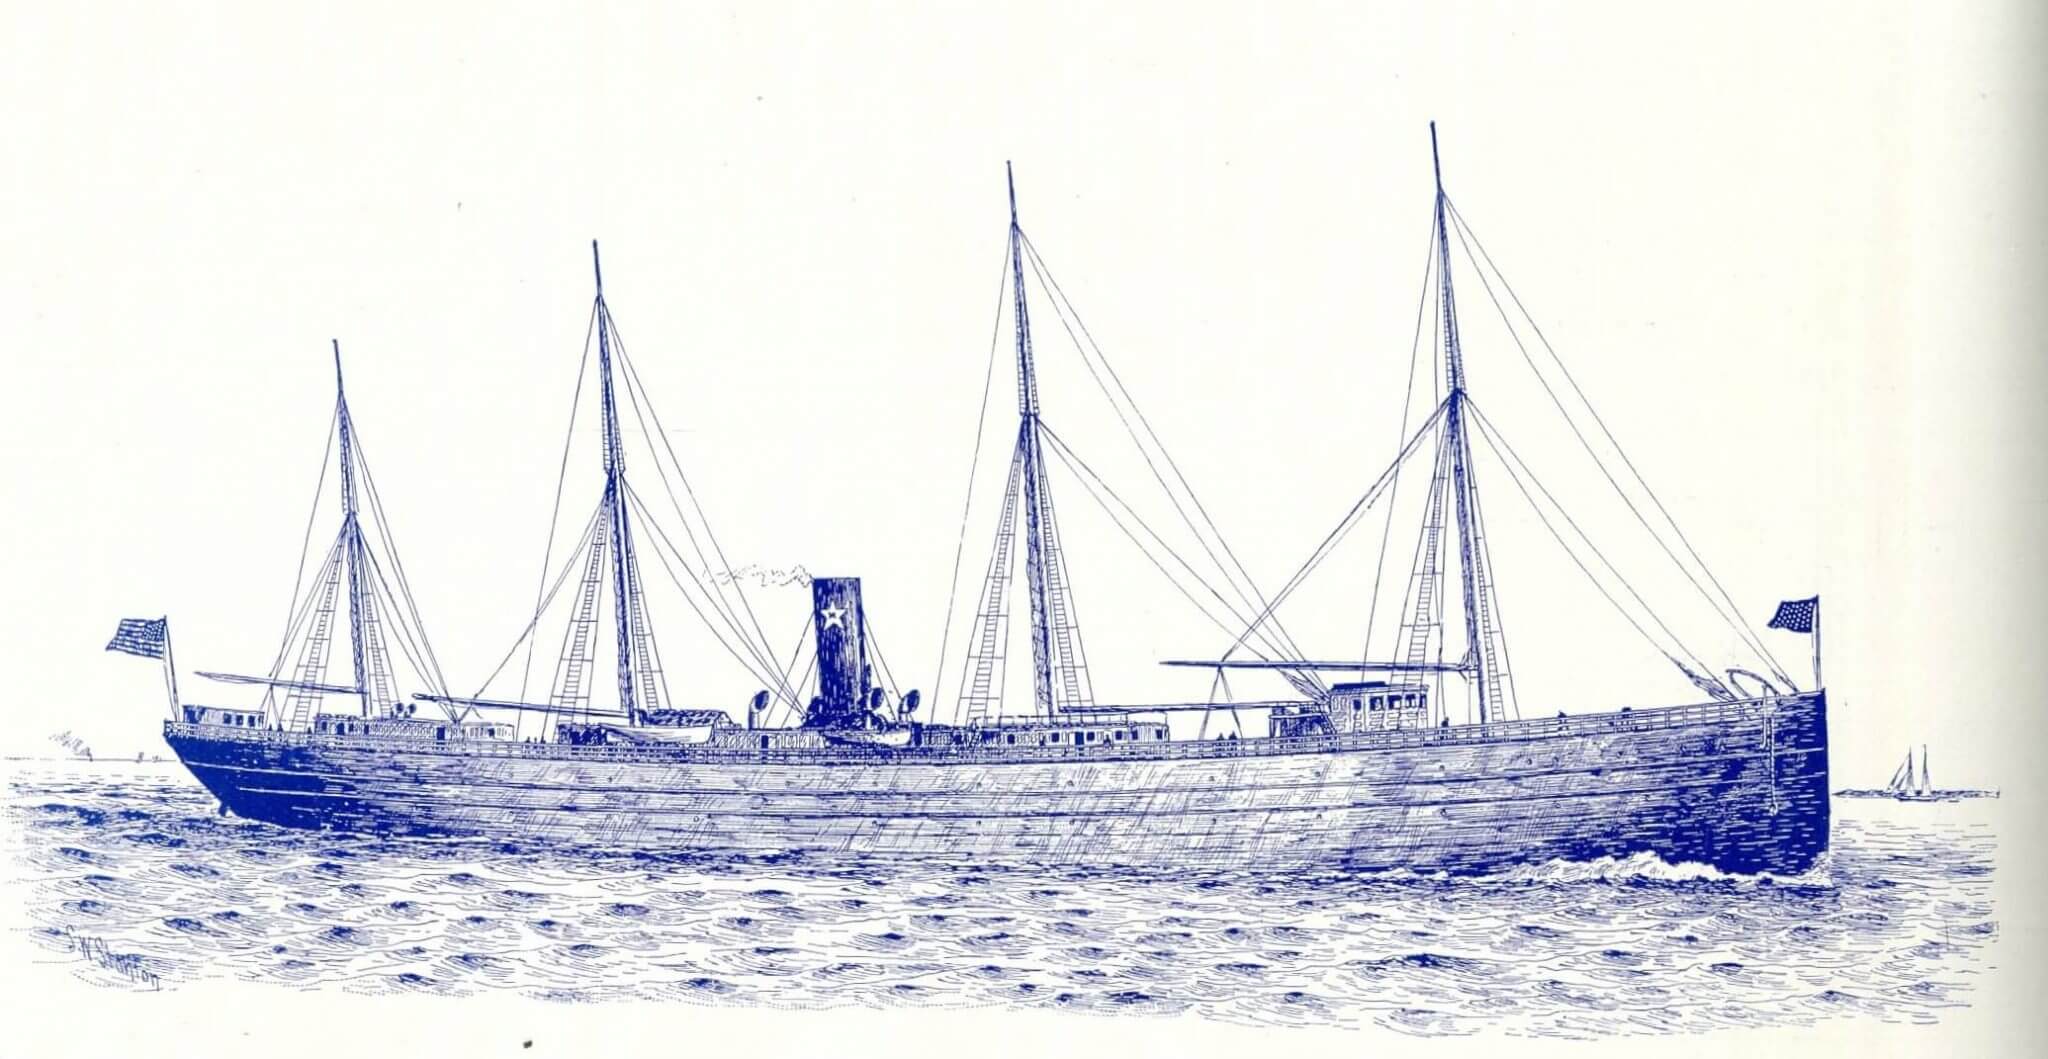 A sketch of the Excelsior.